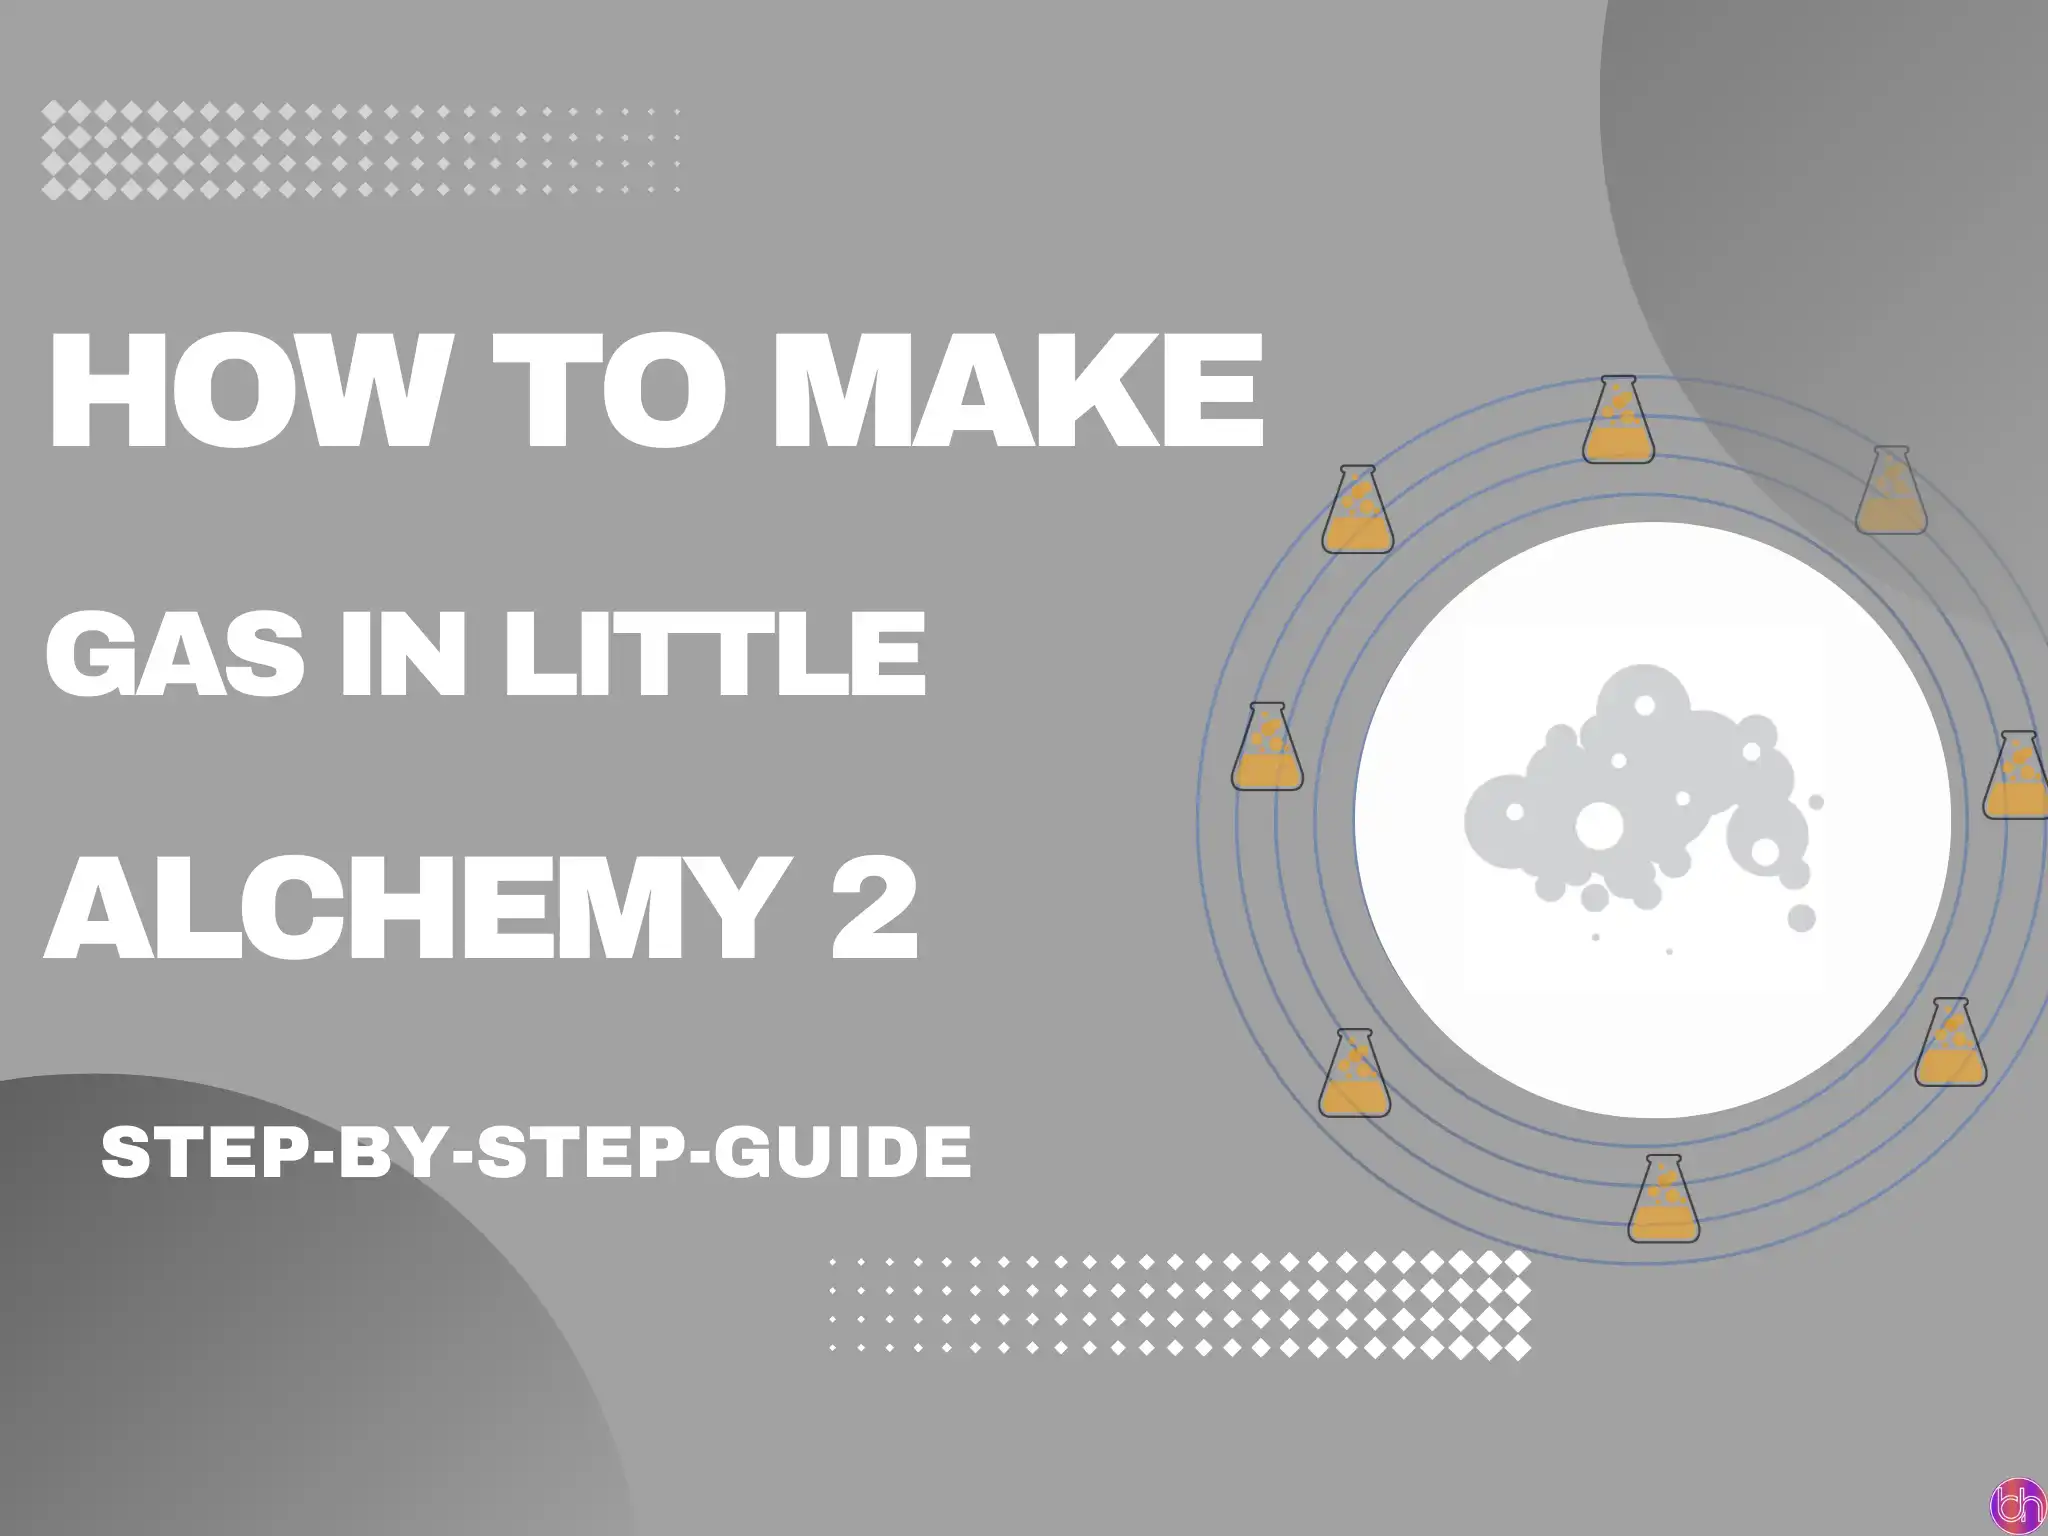 How to make Gas in little alchemy 2